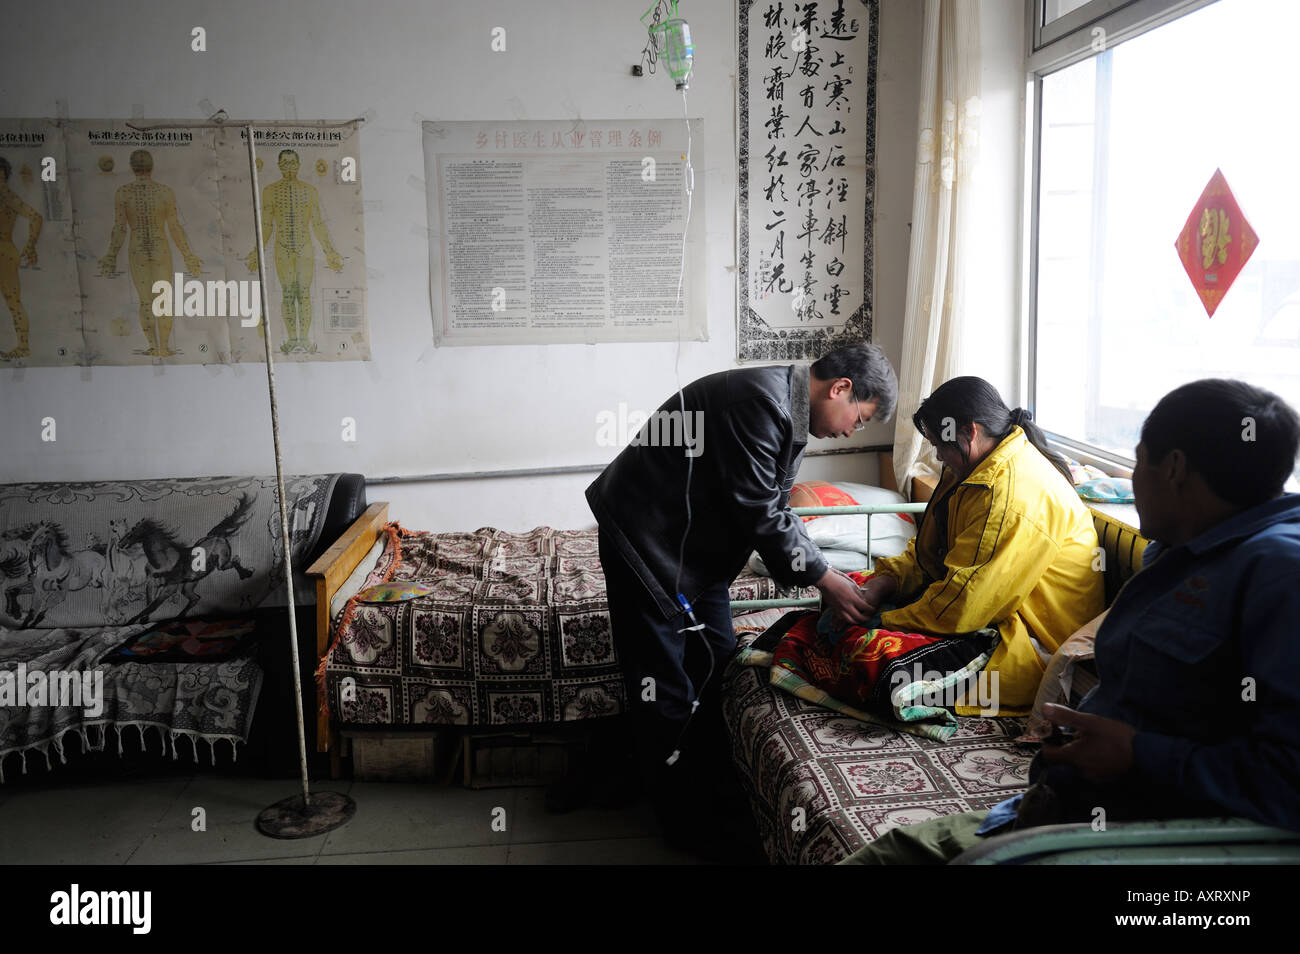 A doctor injecting a patient with antibiotics at a private clinic in a town, Hebei province, China. 27-Mar-2008 Stock Photo